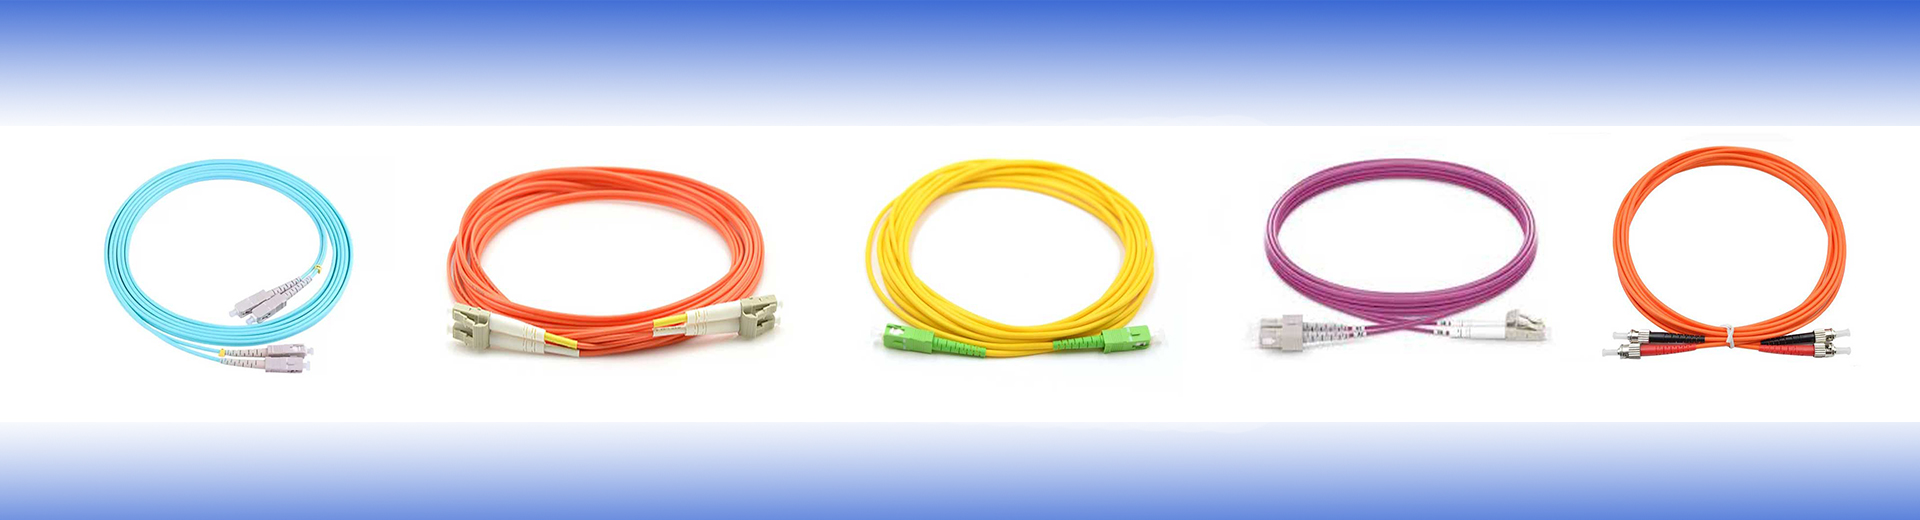 Your Professional network and fiber structure cabling Supplier